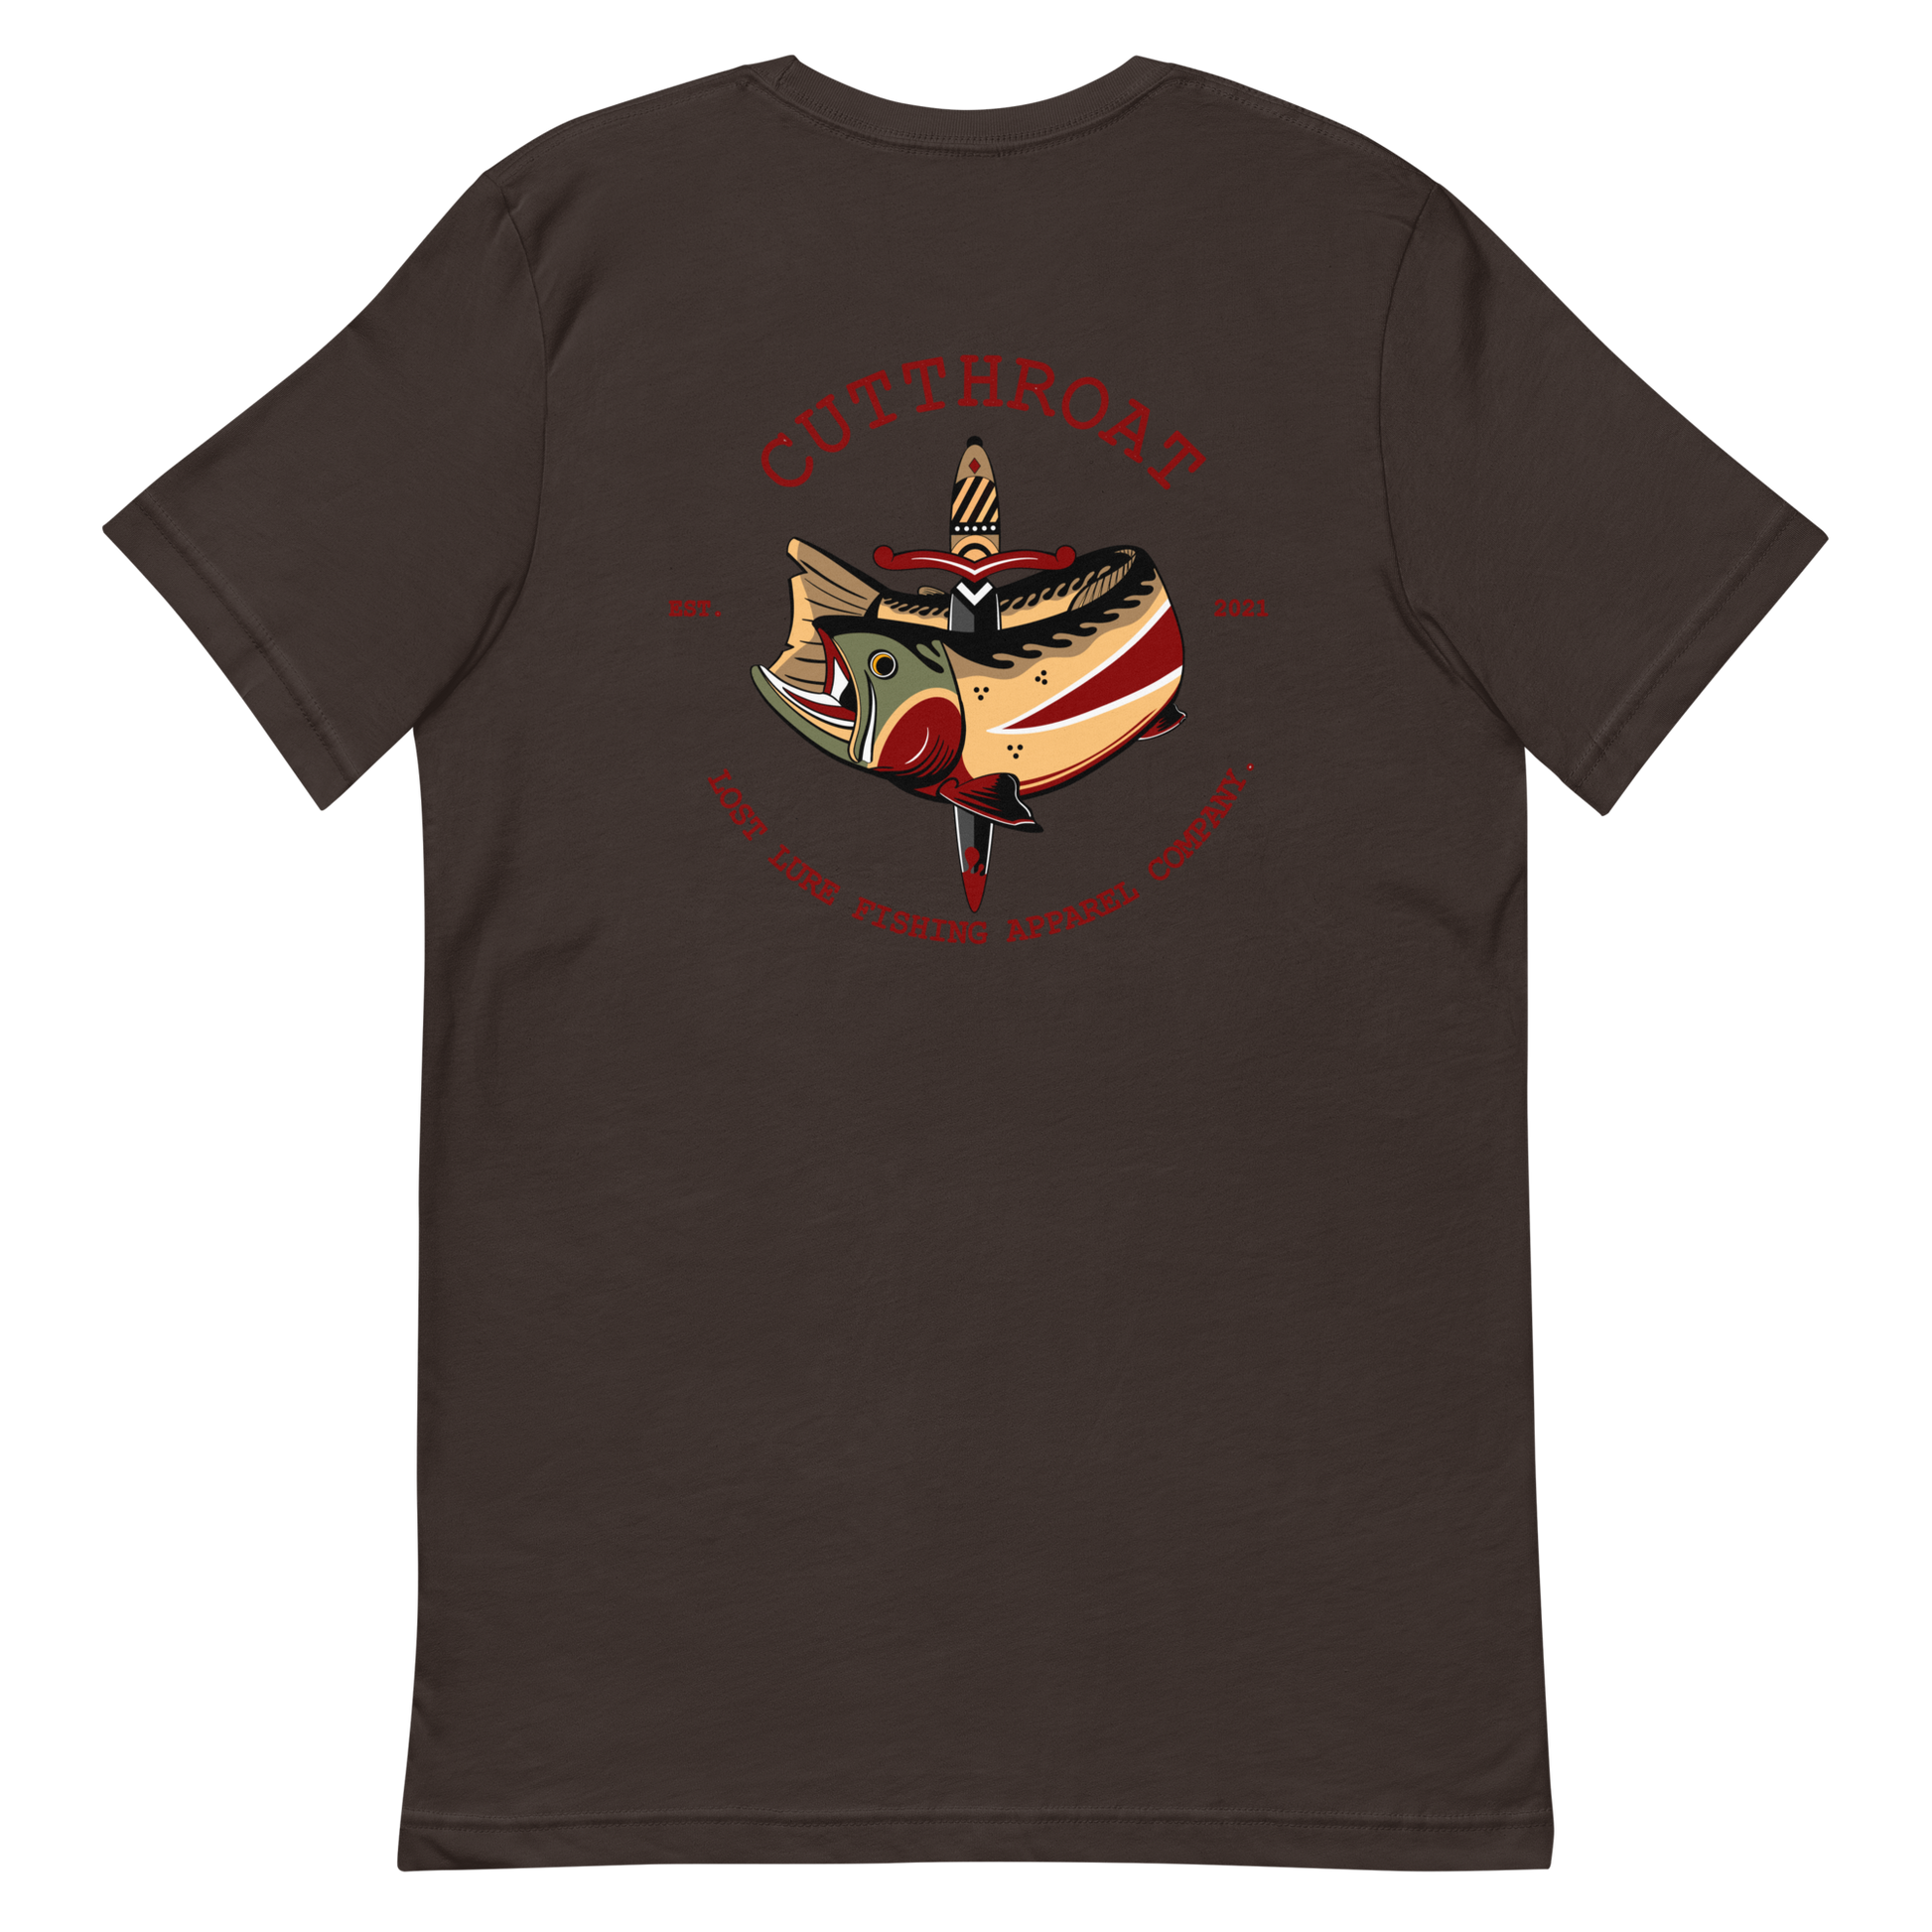 Cutthroat Trout fishing shirt. It’s an American traditional style design with a cutthroat trout and a dagger. The shirt reads Cutthroat trout, est. 2021, lost lure fishing apparel company. The front of the shirt has the lost lure logo. Brown fishing shirt, back side